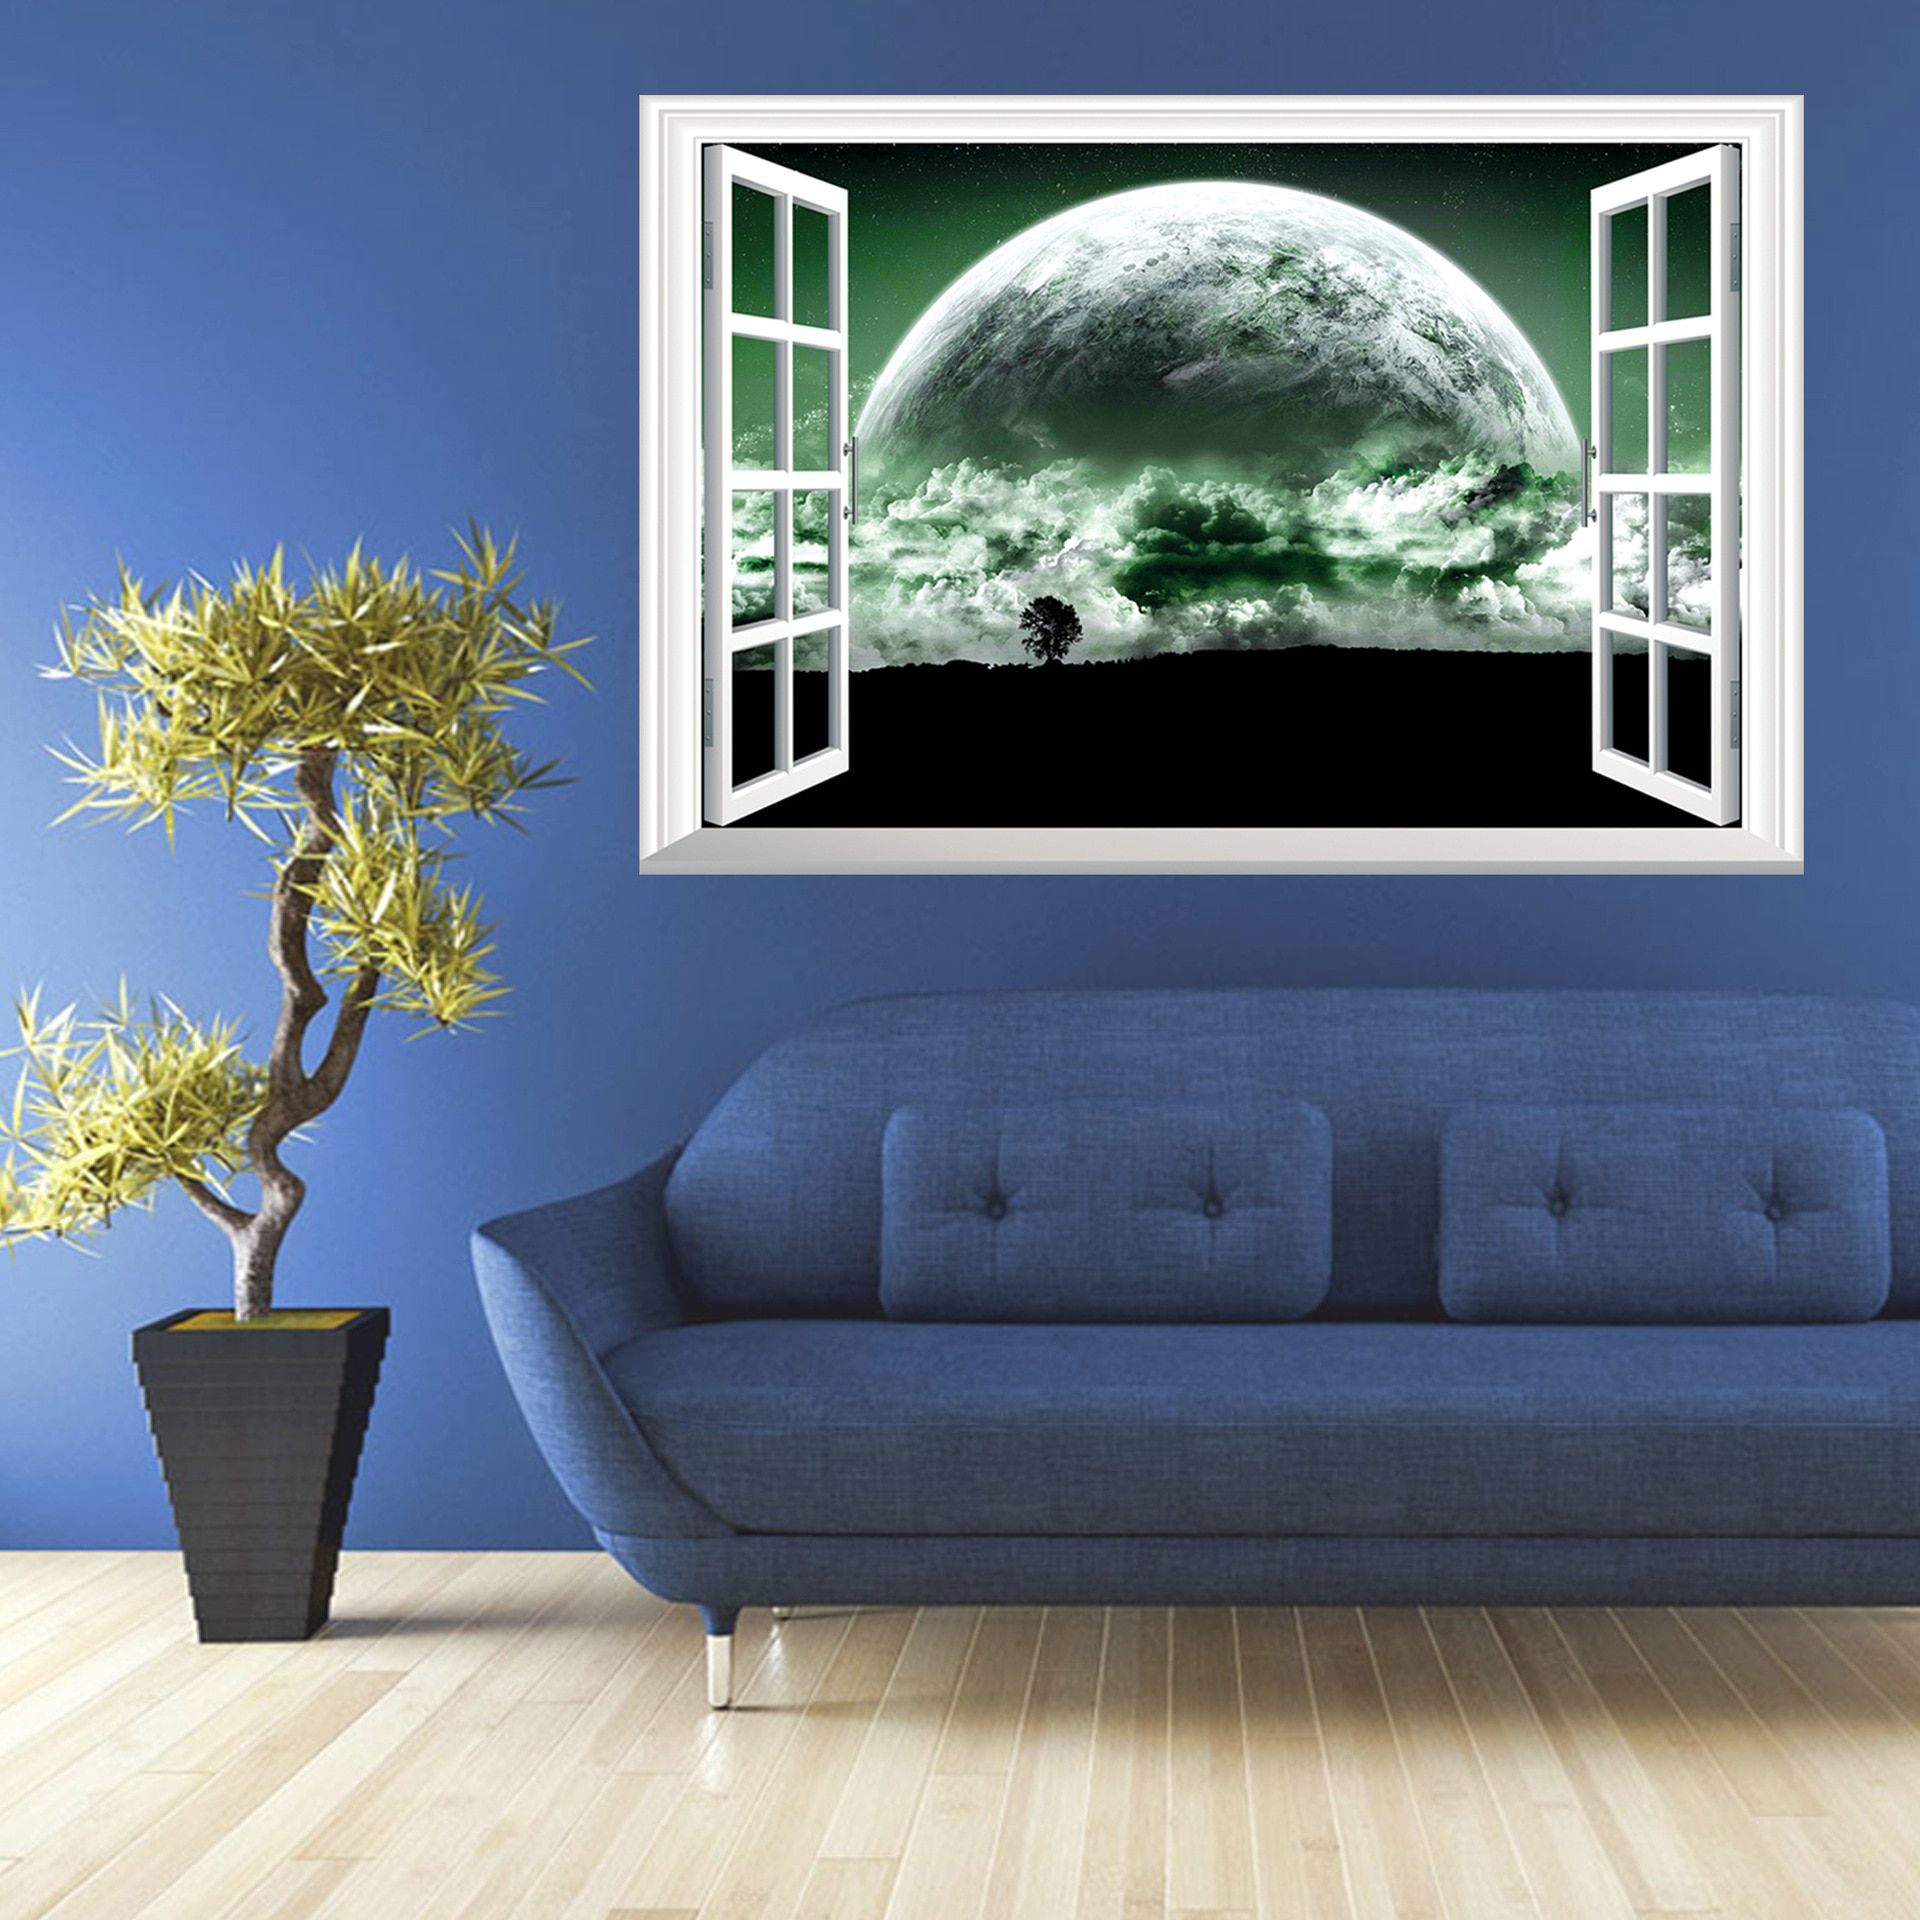 3d Galaxy Wall Sticker Outer Space Planet Stickers For Stripes Wall Art (View 4 of 15)